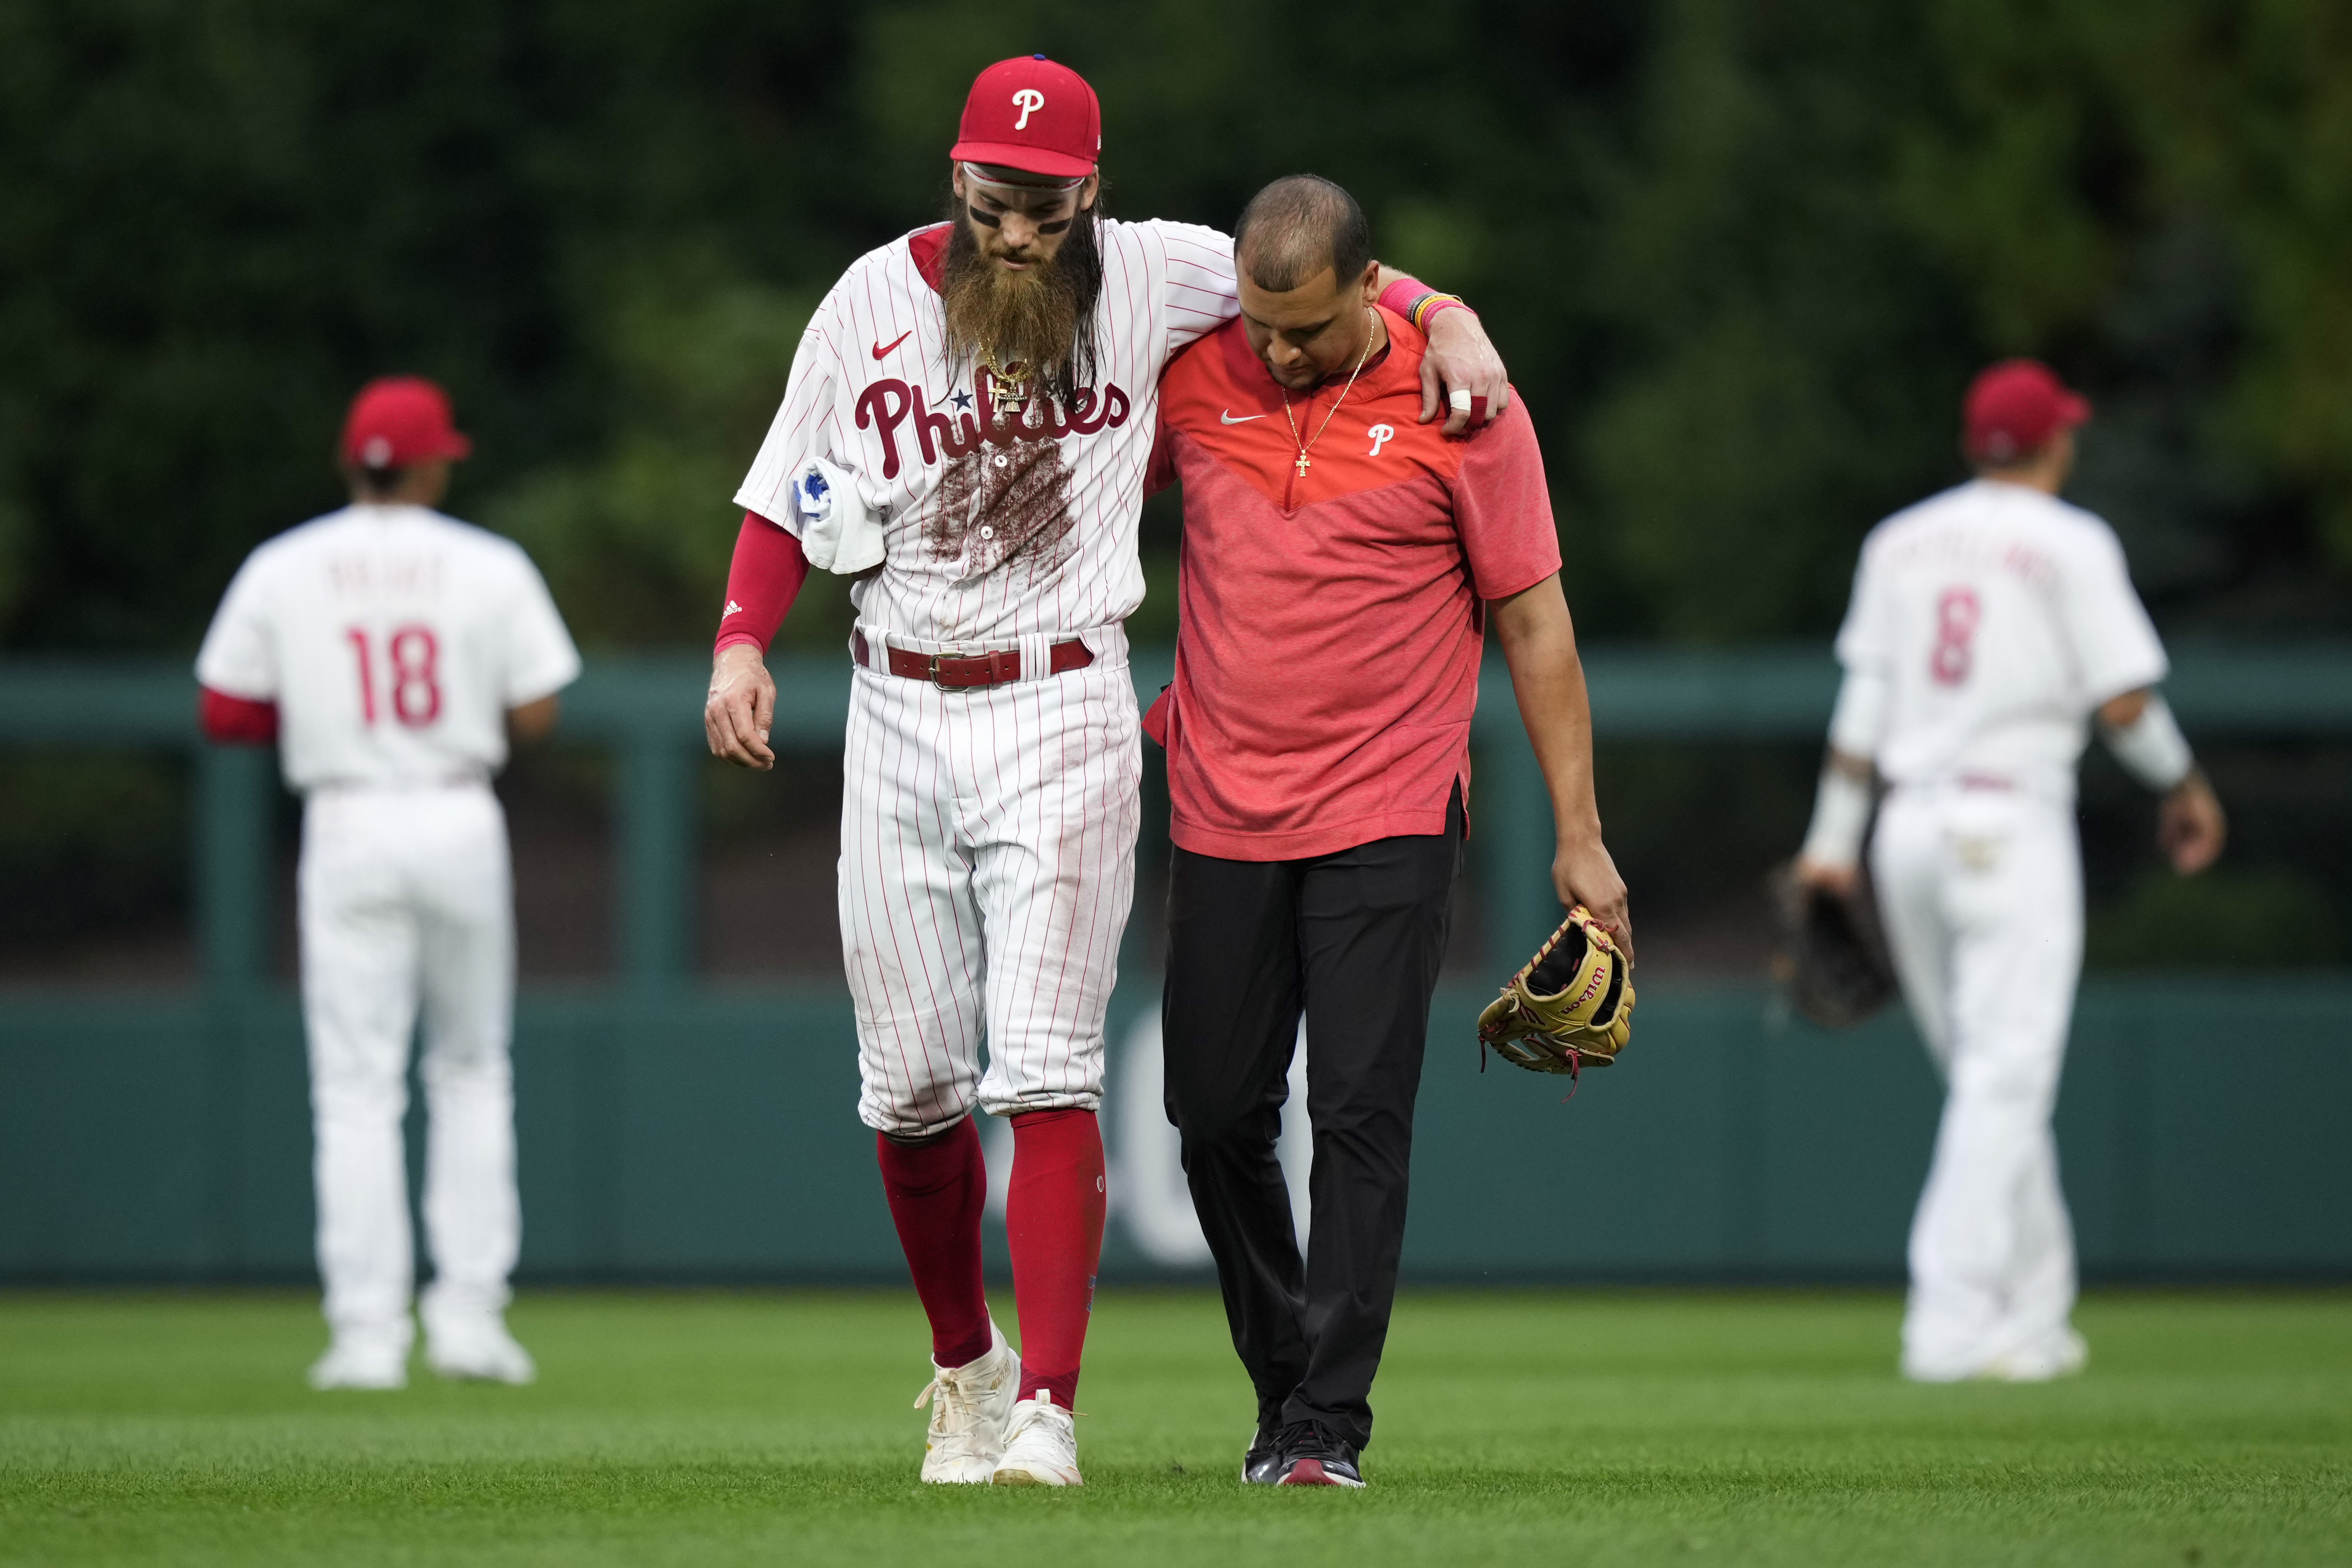 Bryce Harper suffers injury in collision, returns to game